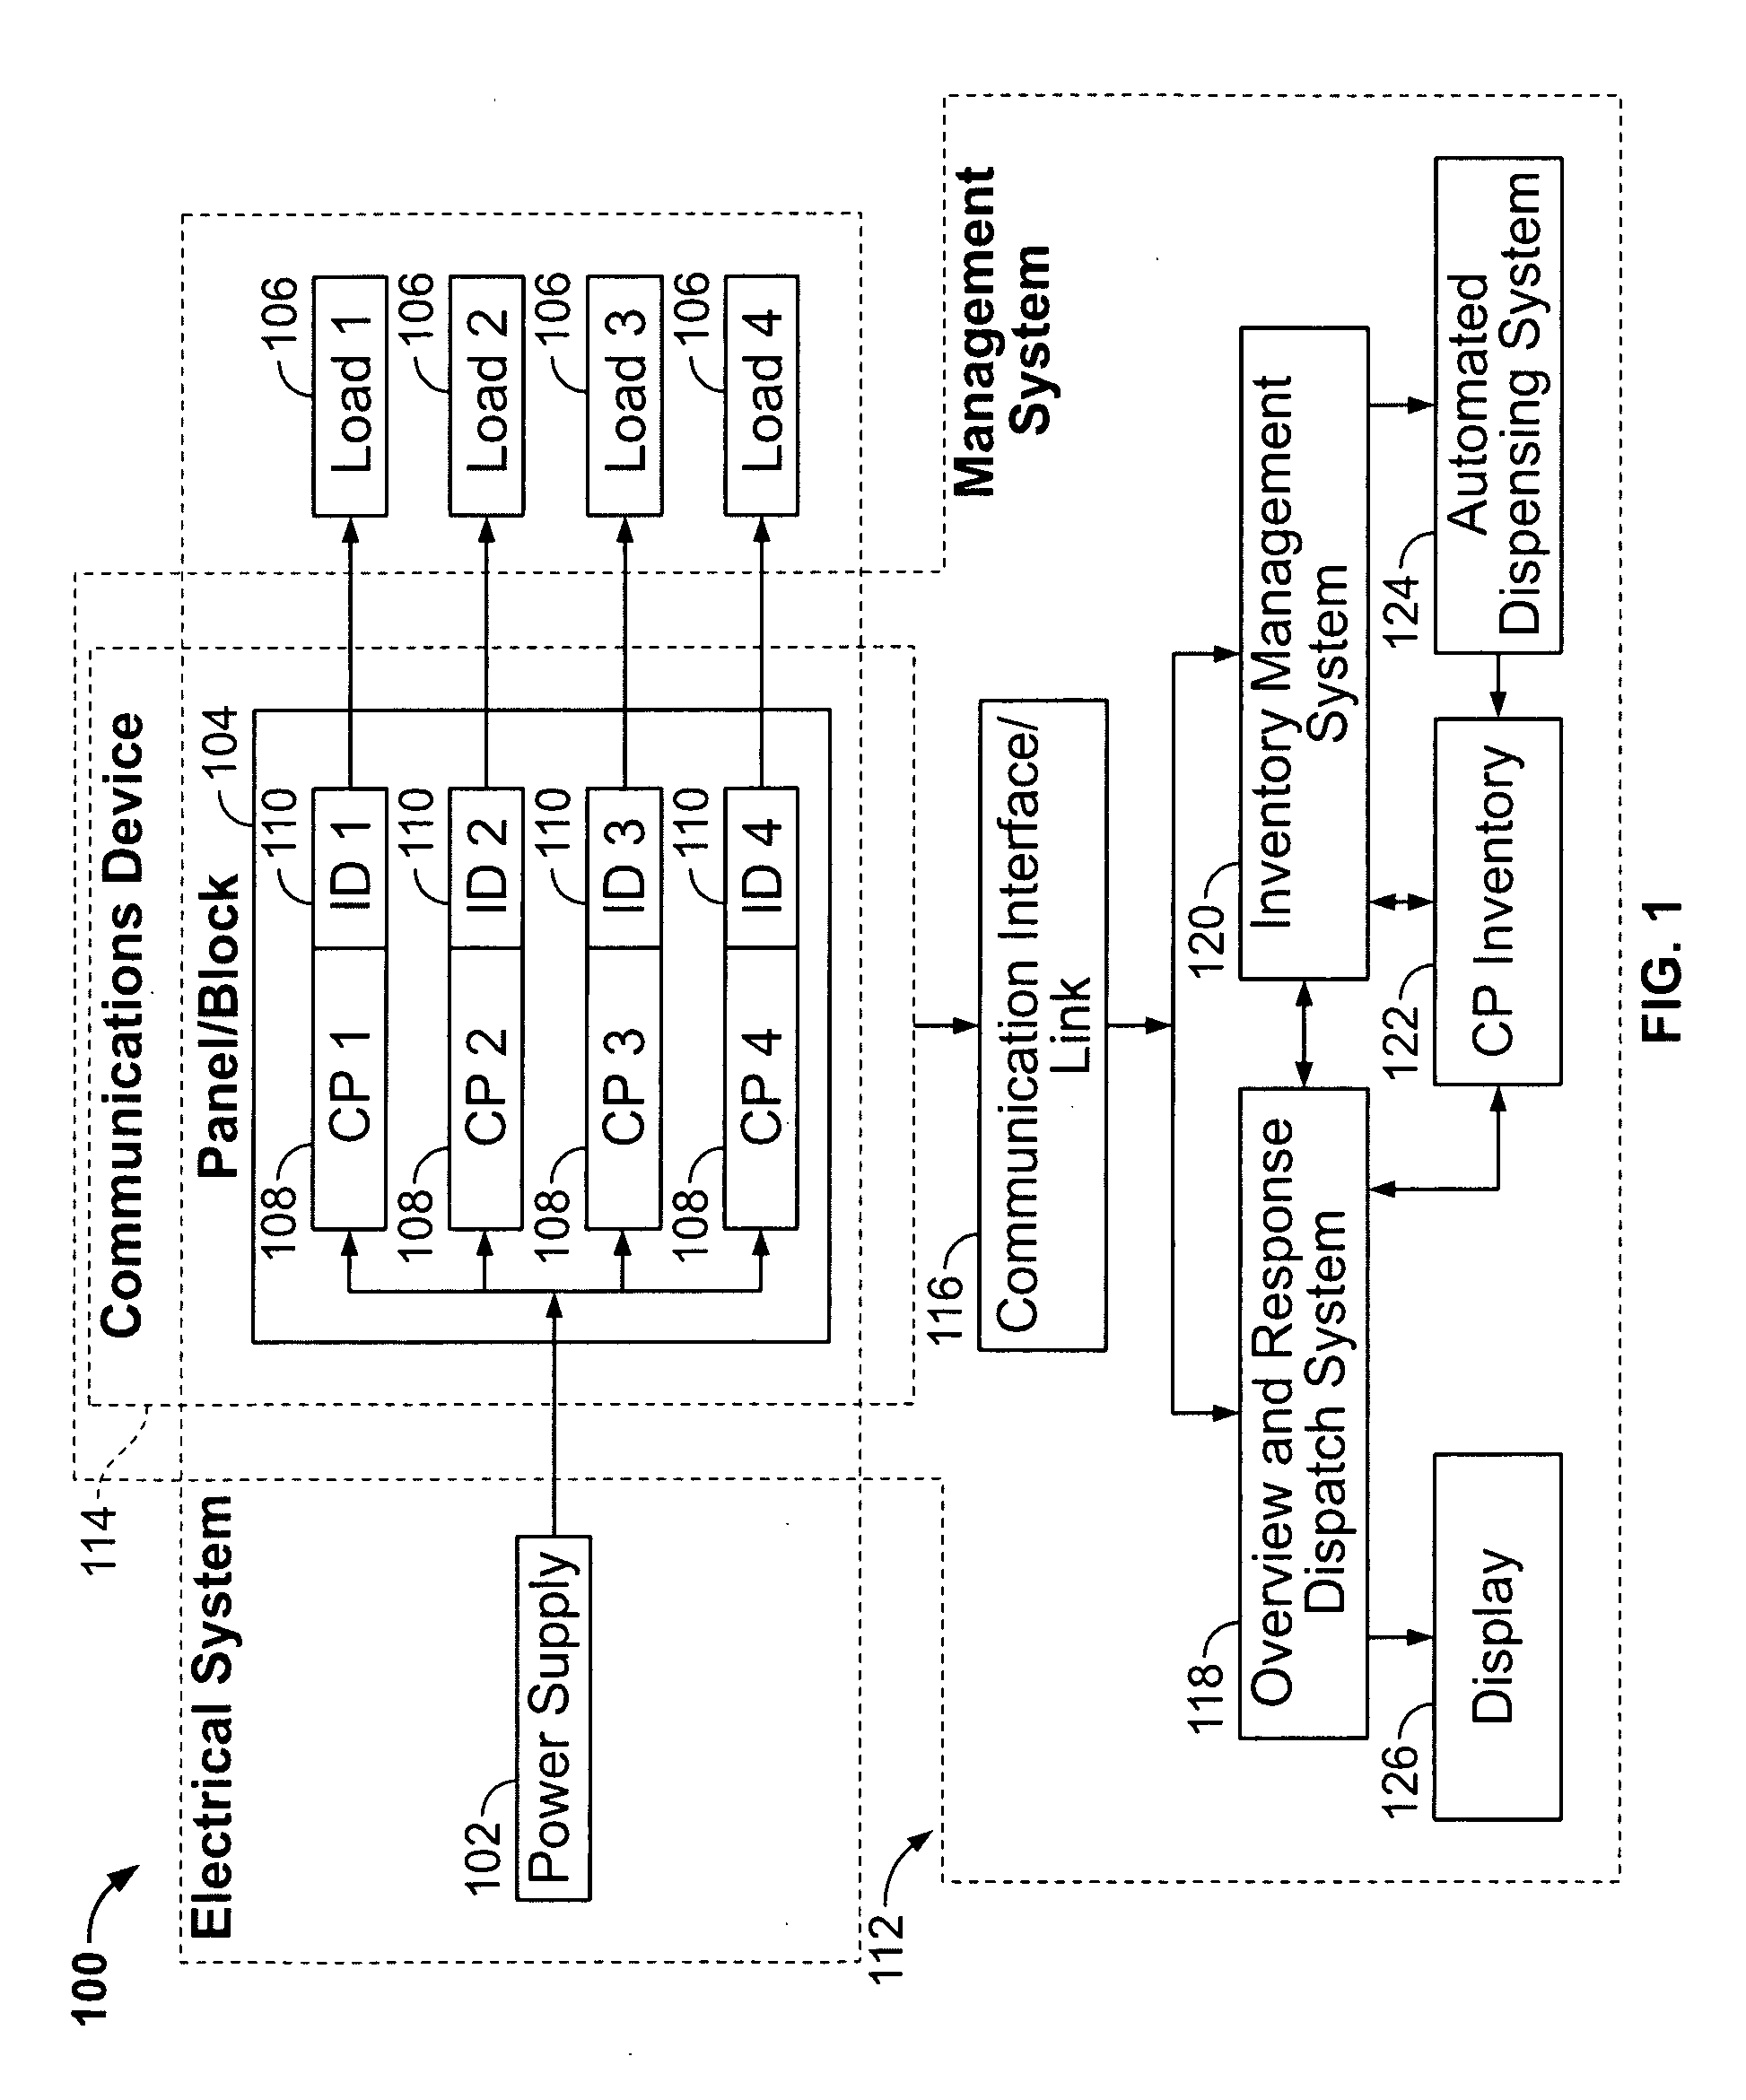 Circuit protector monitoring assembly kit and method